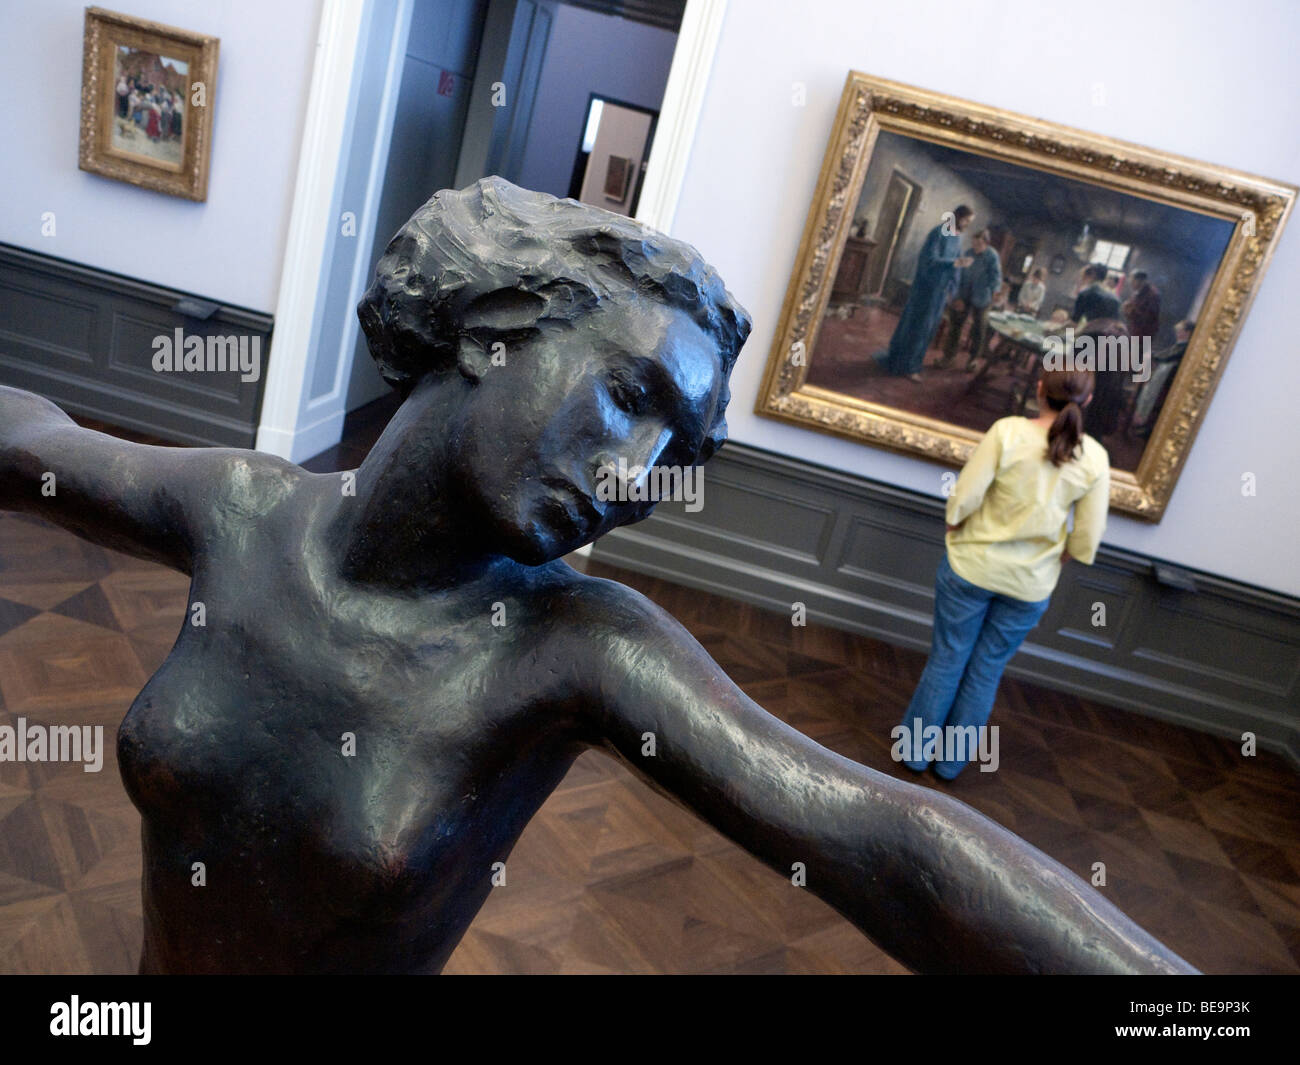 Sculpture inside gallery in Alte Nationalgalerie on Museumsinsel in Berlin Germany Stock Photo